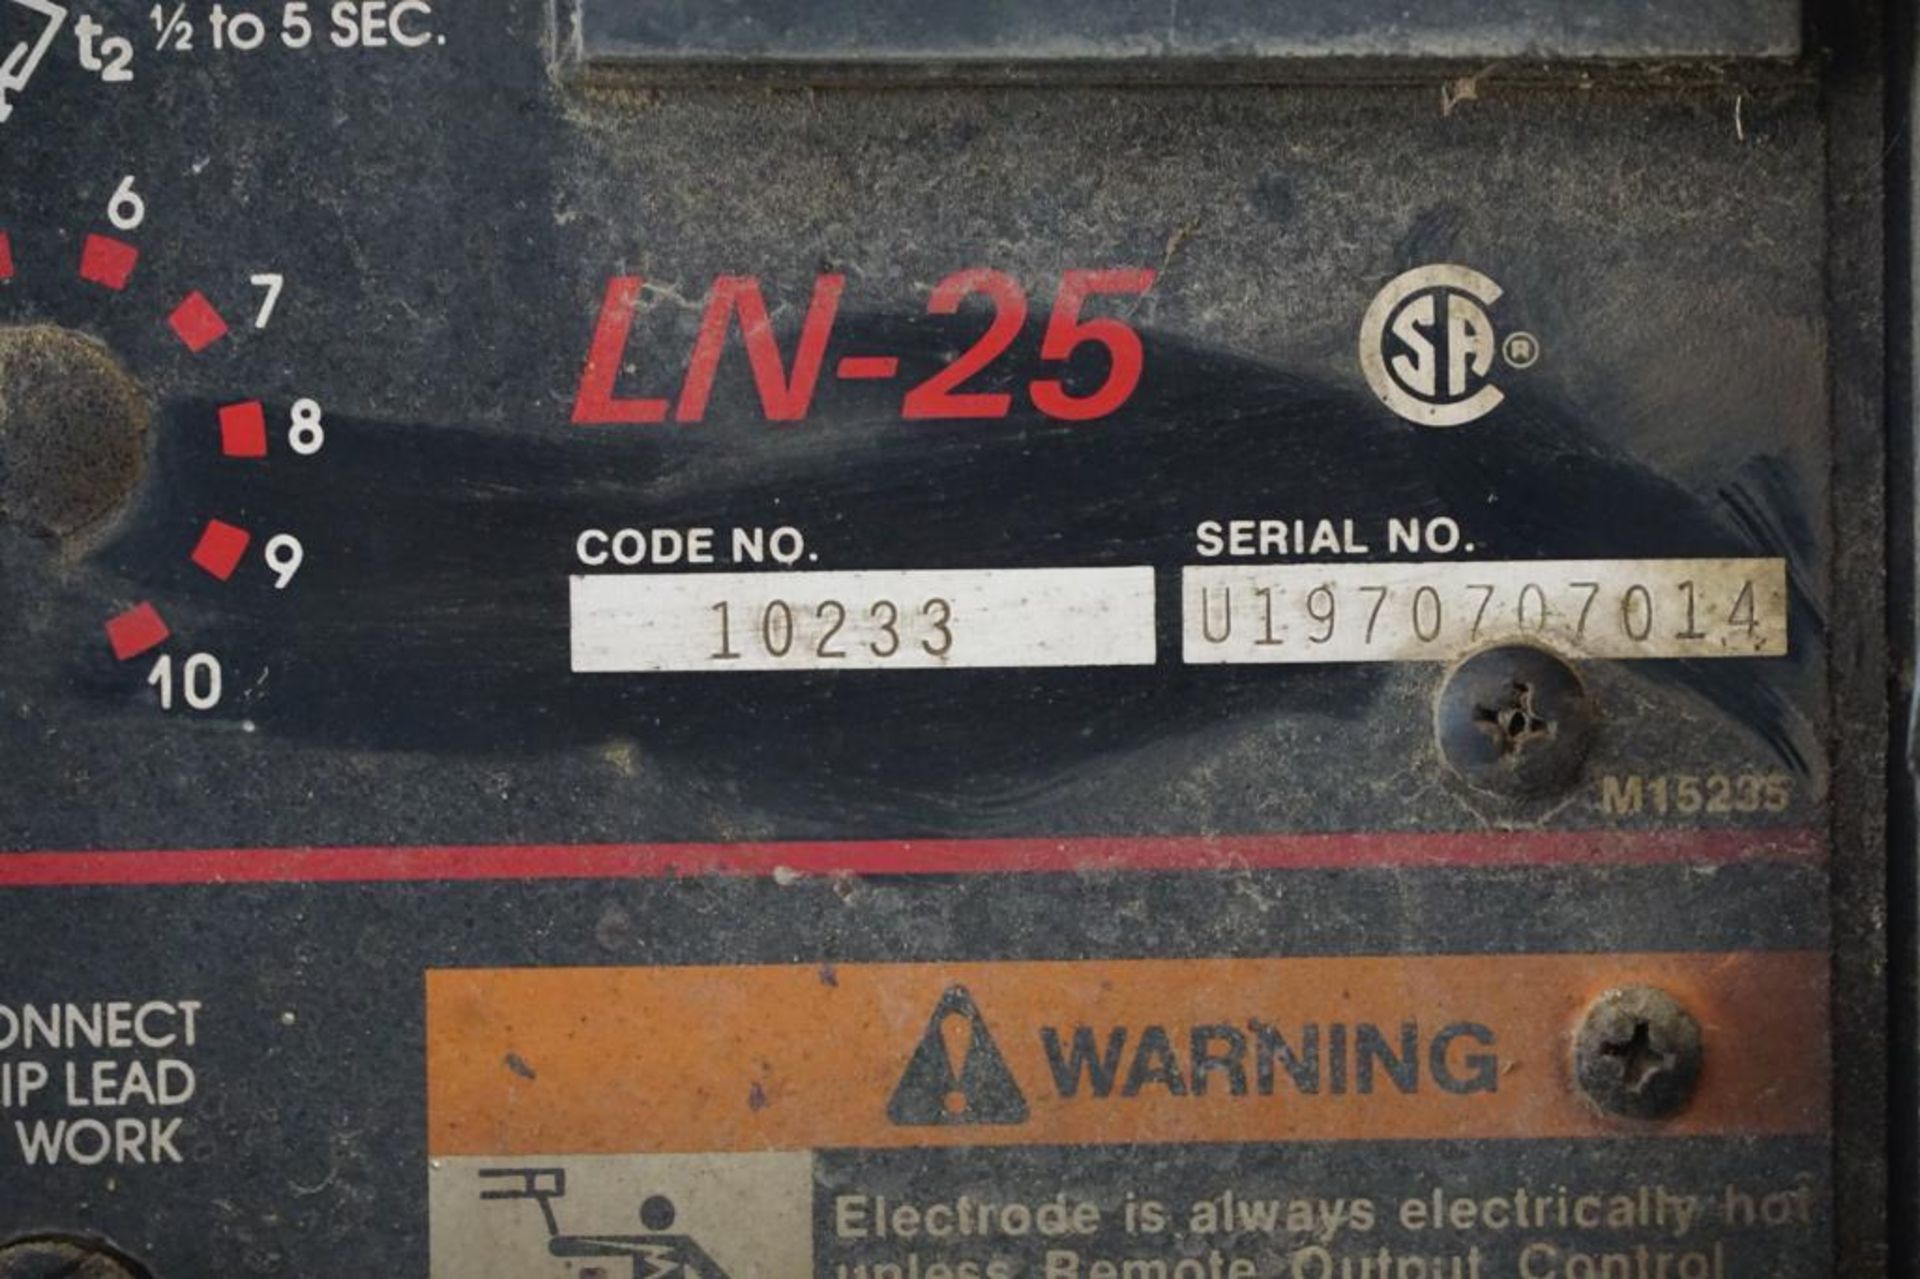 Lincoln Ranger 8 Generator with Lincoln LN-25 Arc Welder - Image 8 of 10